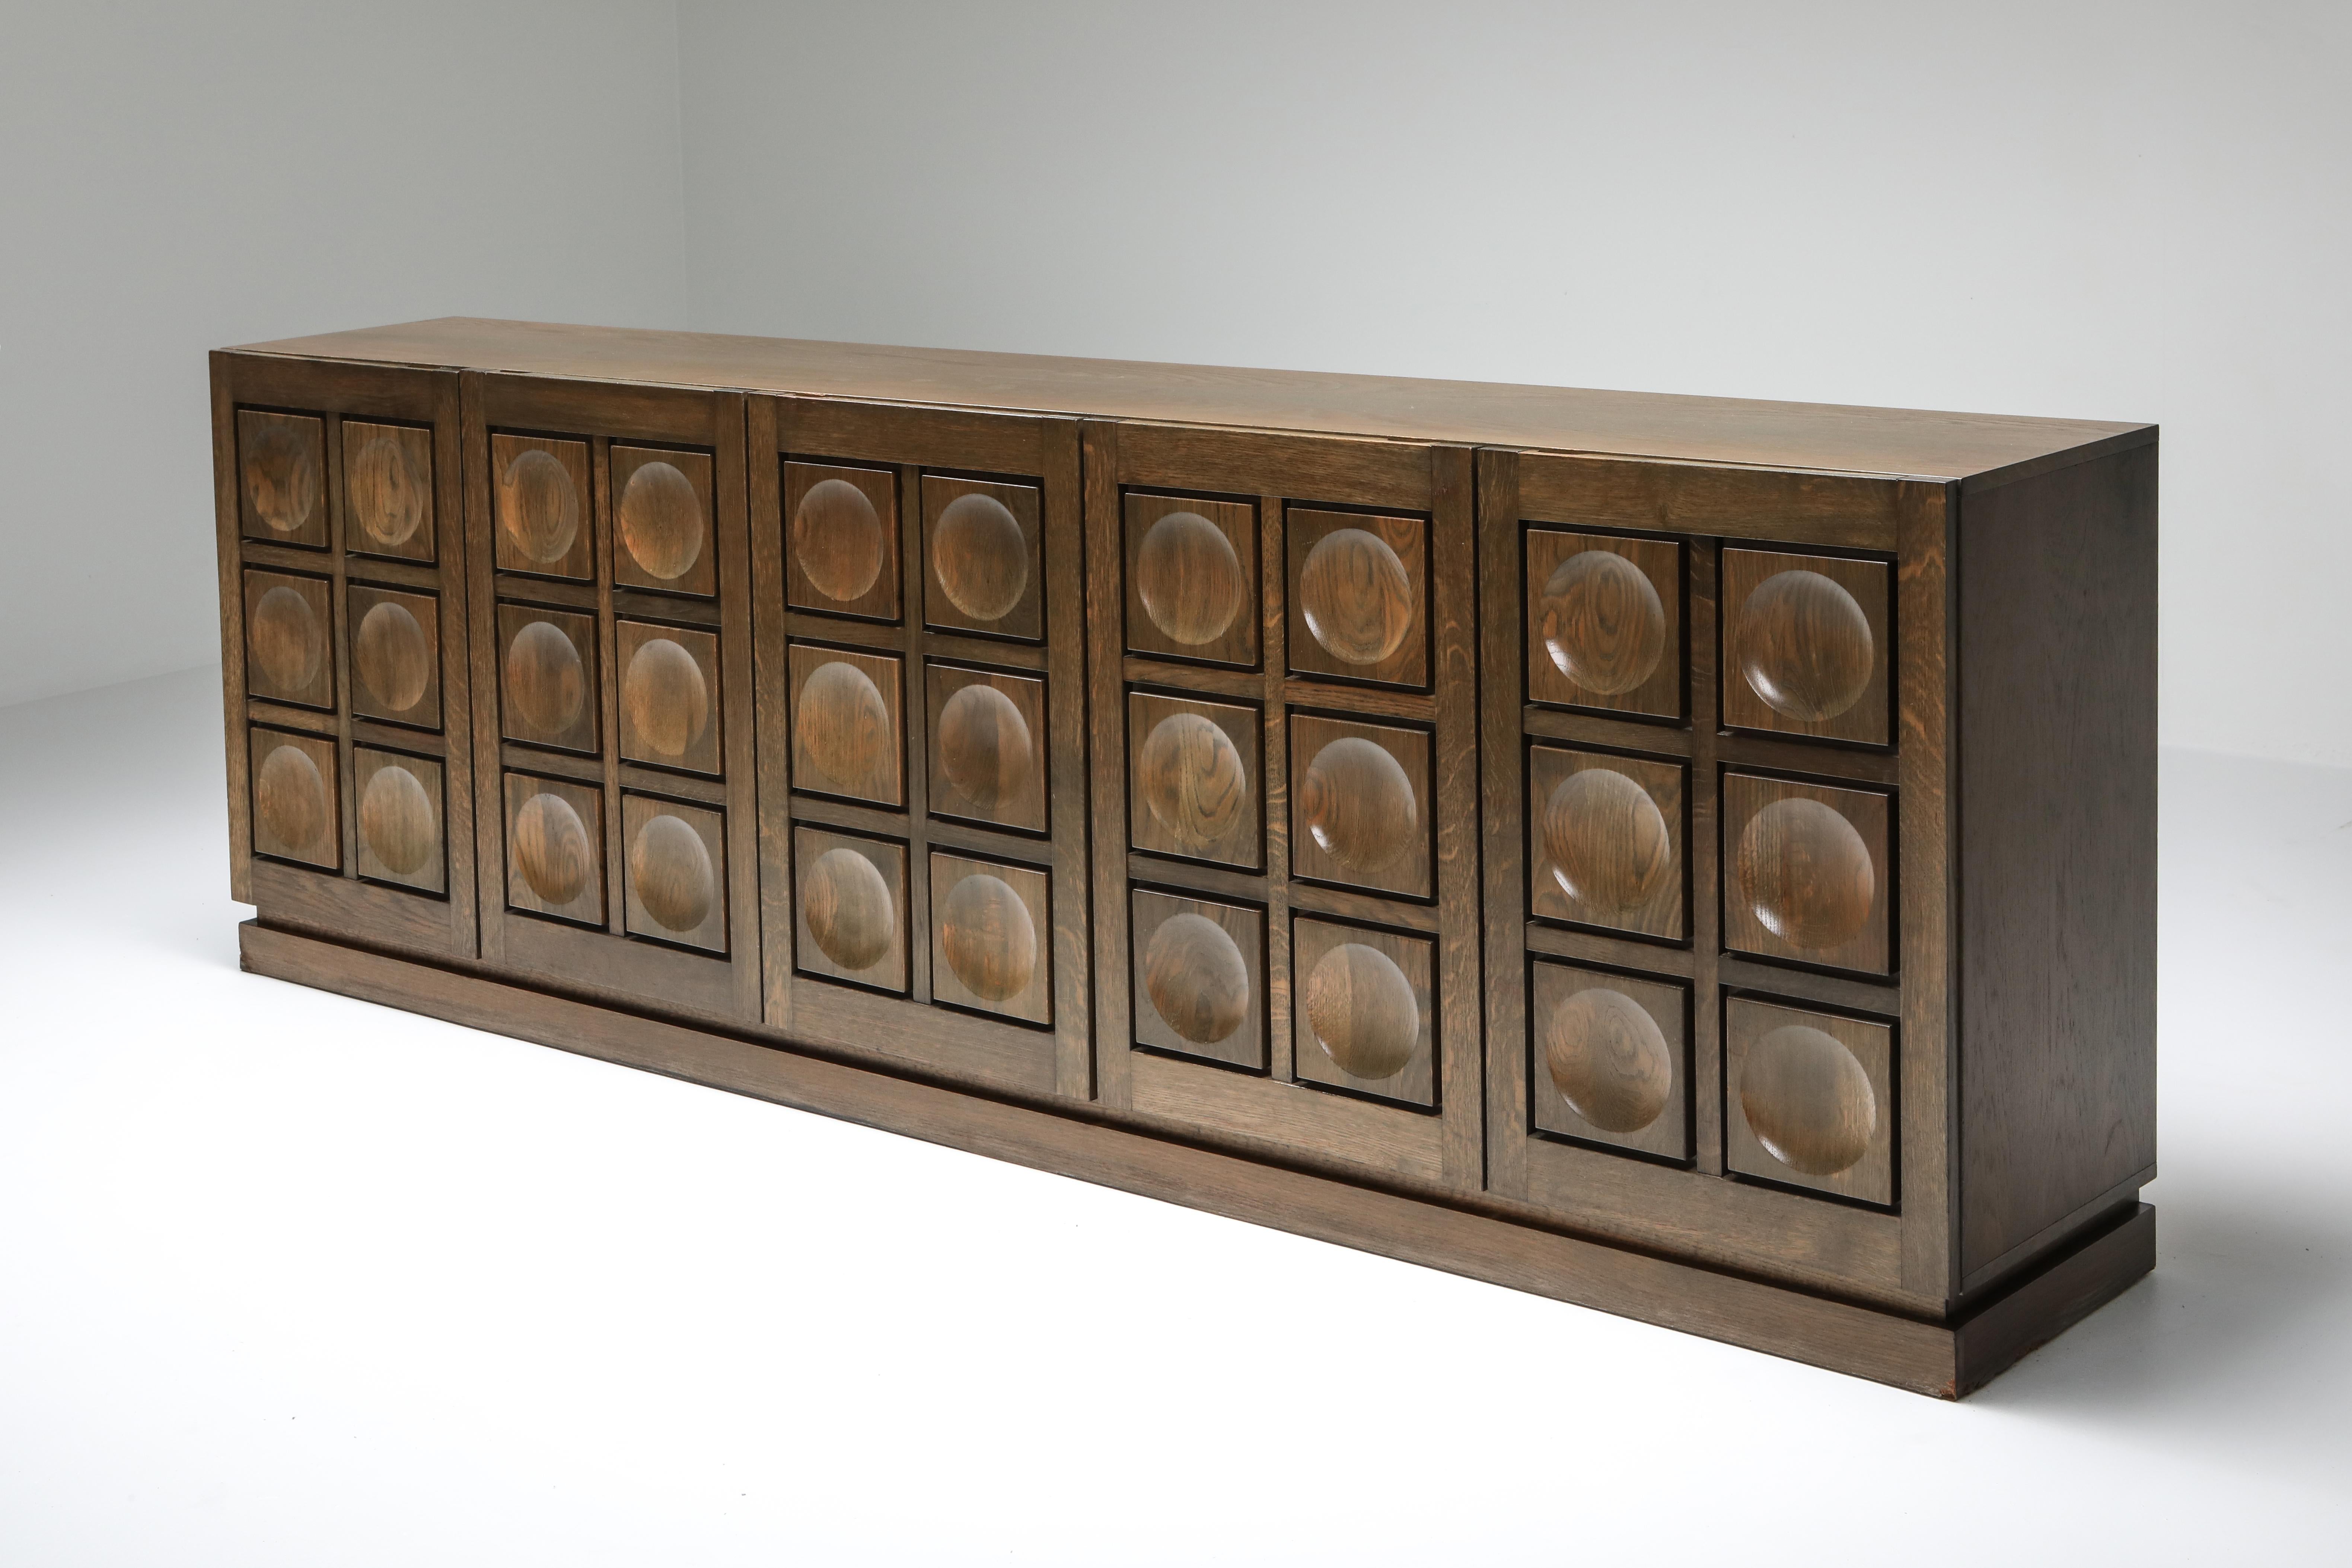 De Coene, Brutalist, five-door sideboard, Belgium, 1970s

The geometrical door panels are typical for the era.
The grain of the oak really jumps to the eye.

Would fit well in a Hollywood Regency decor as in a more naturalist